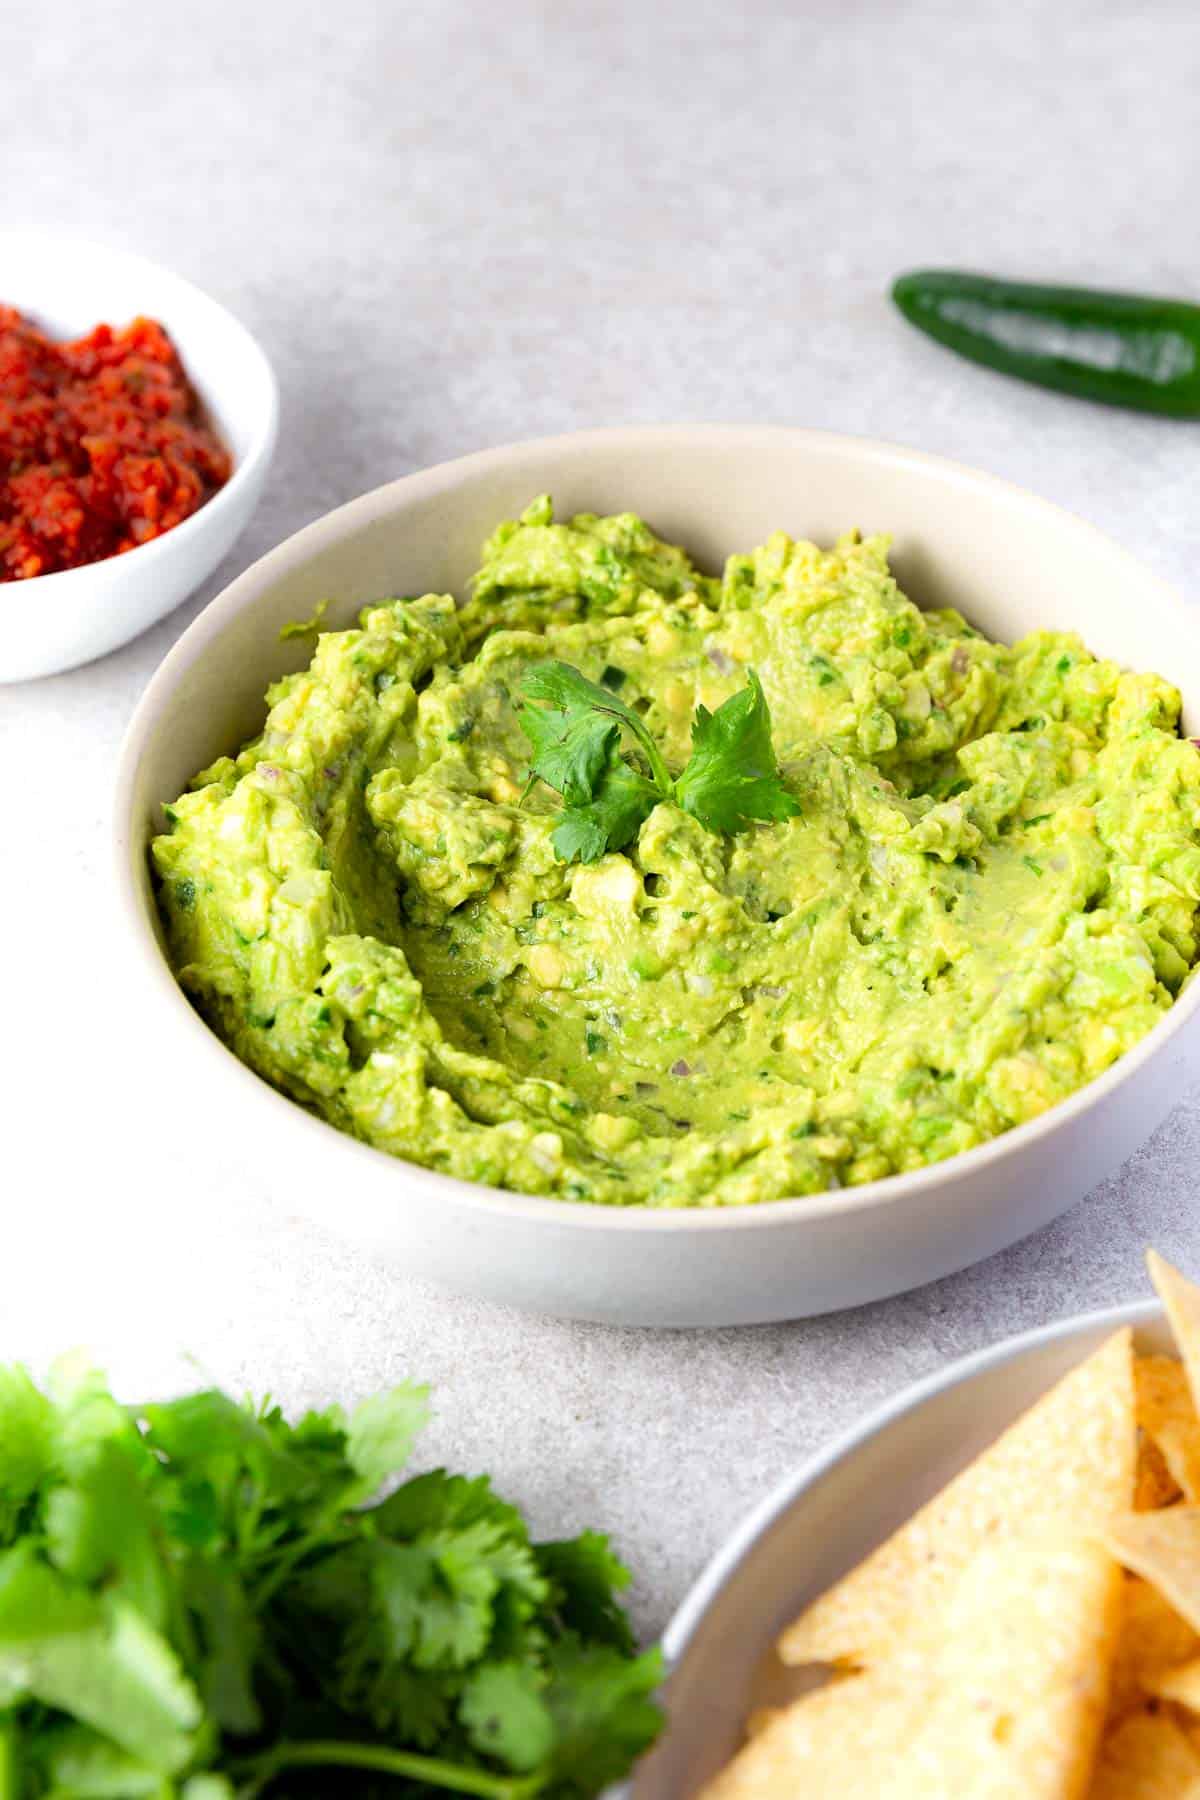 A bowl of guacamole surrounded by salsa and guac ingredients.